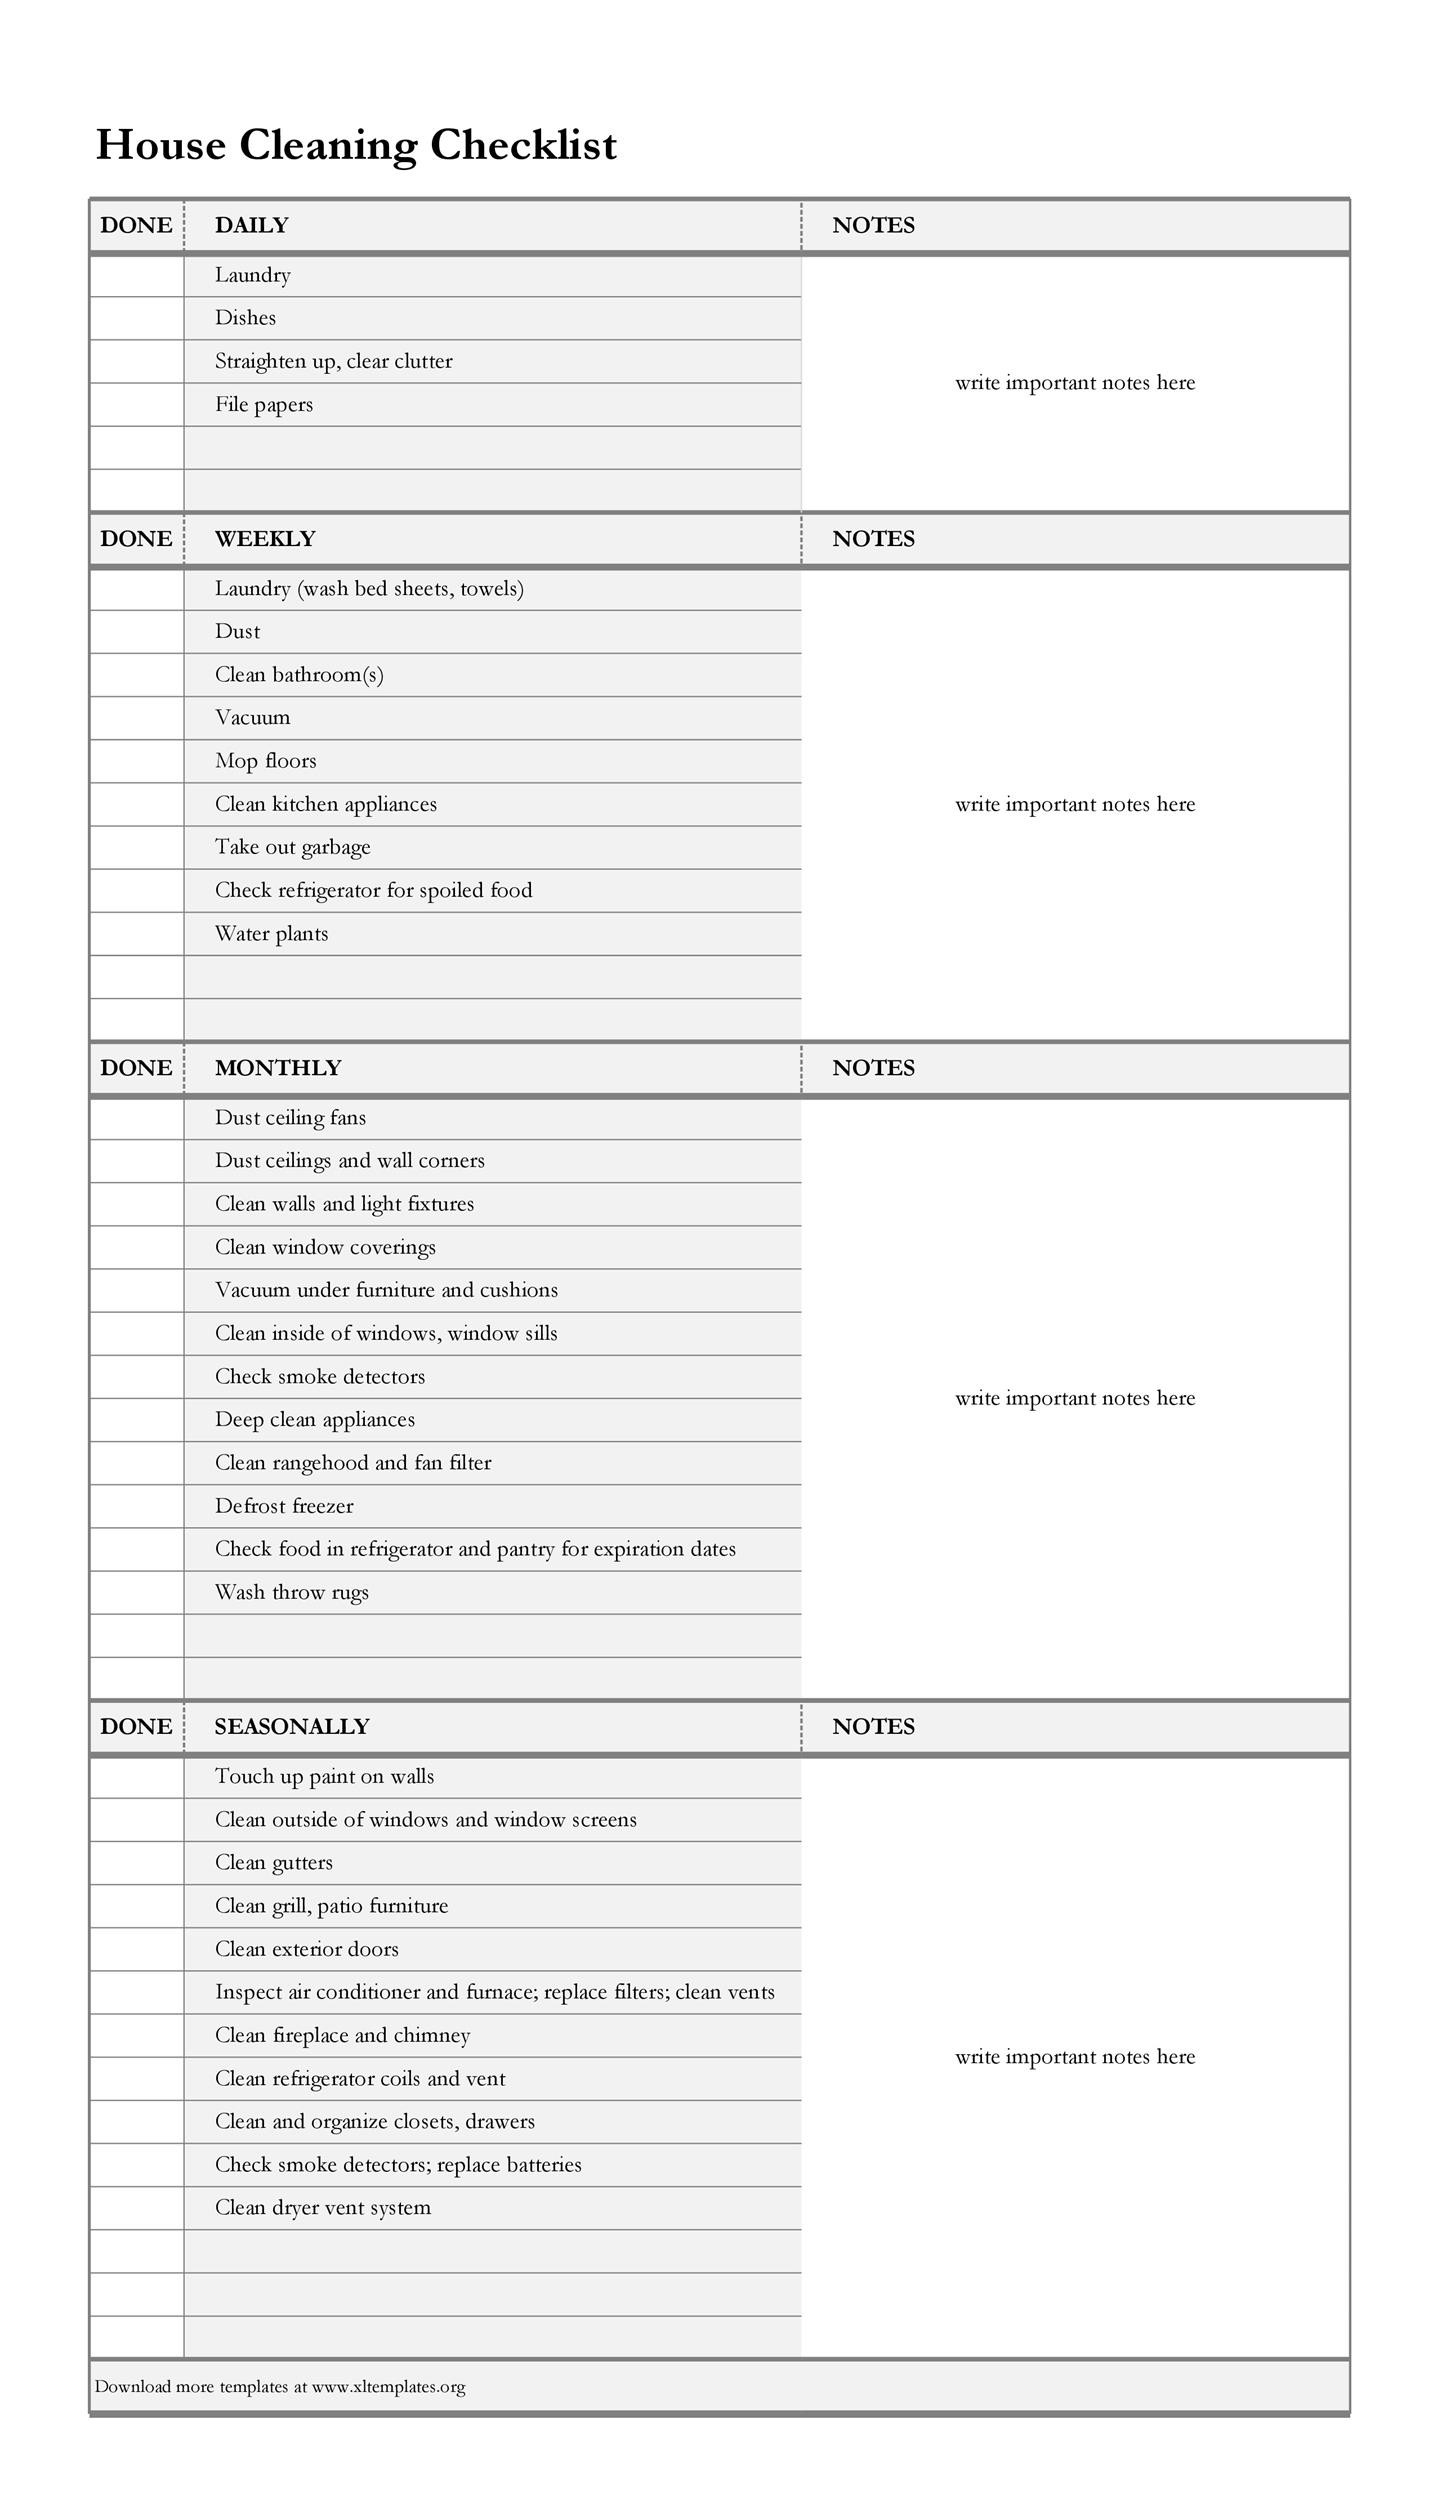 free-printable-house-cleaning-business-forms-printable-forms-free-online